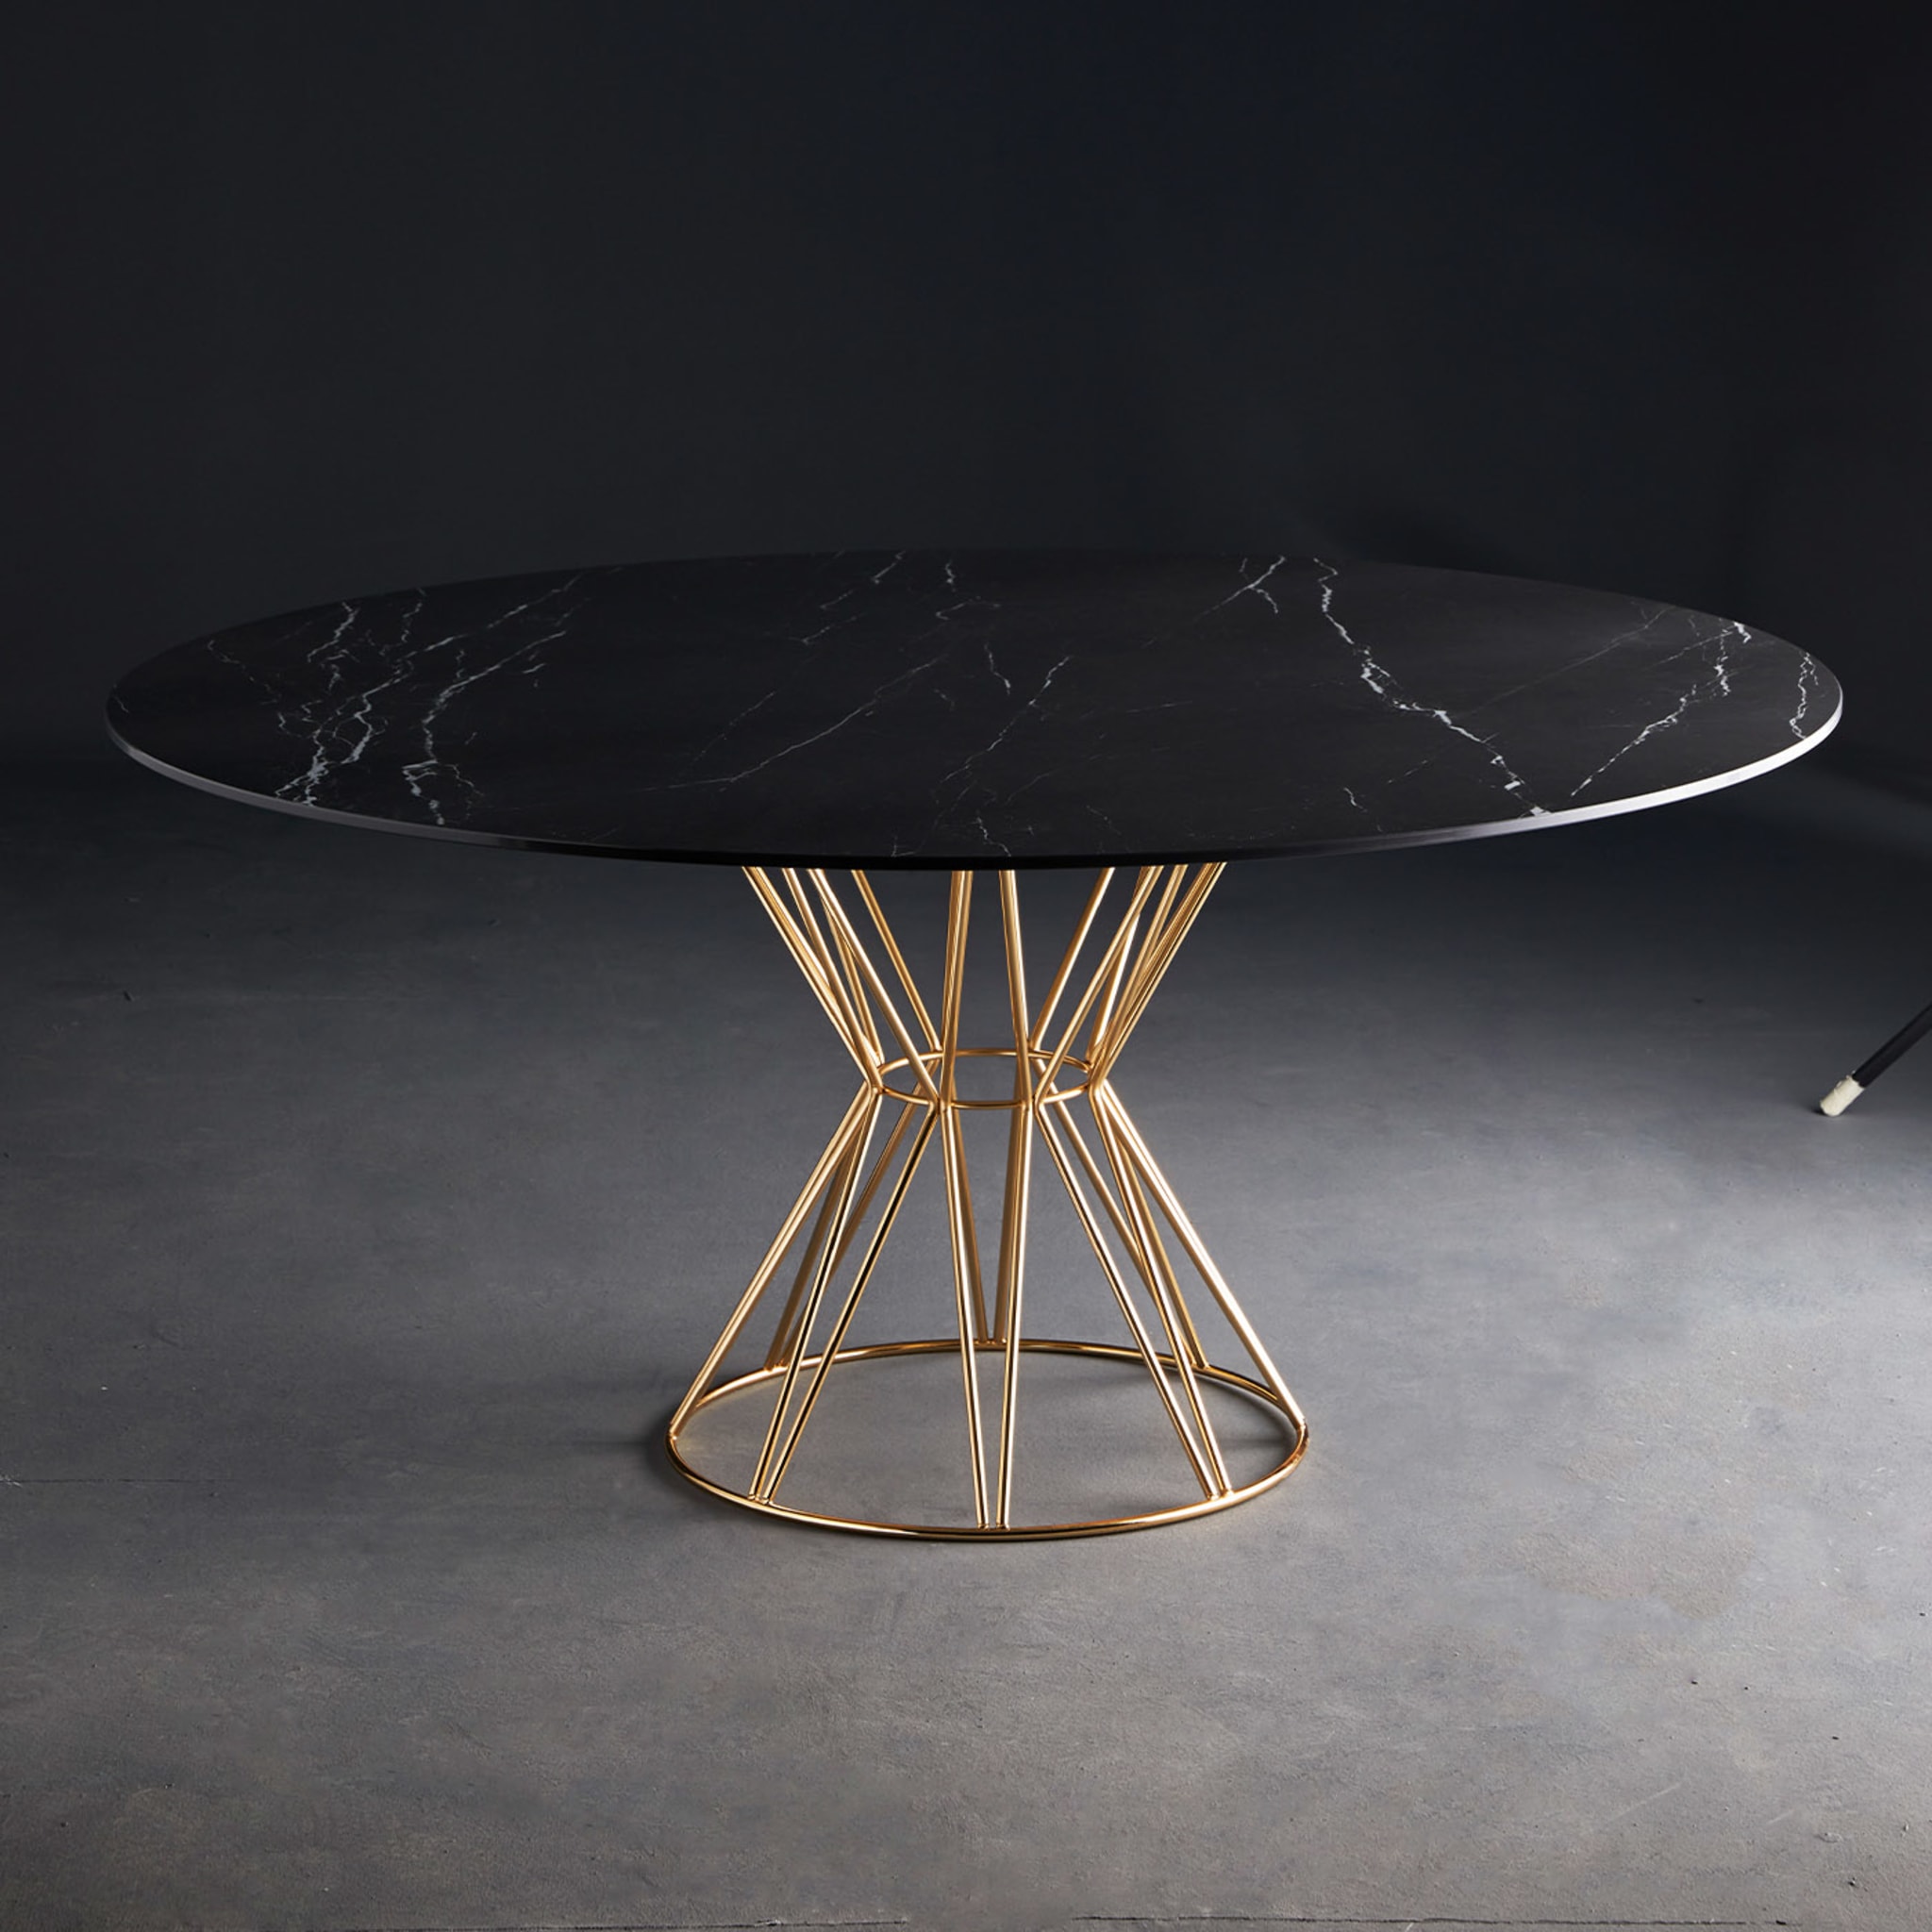 Circus Black Marquina & Brass Table by Fauciglietti Engineering - Alternative view 1